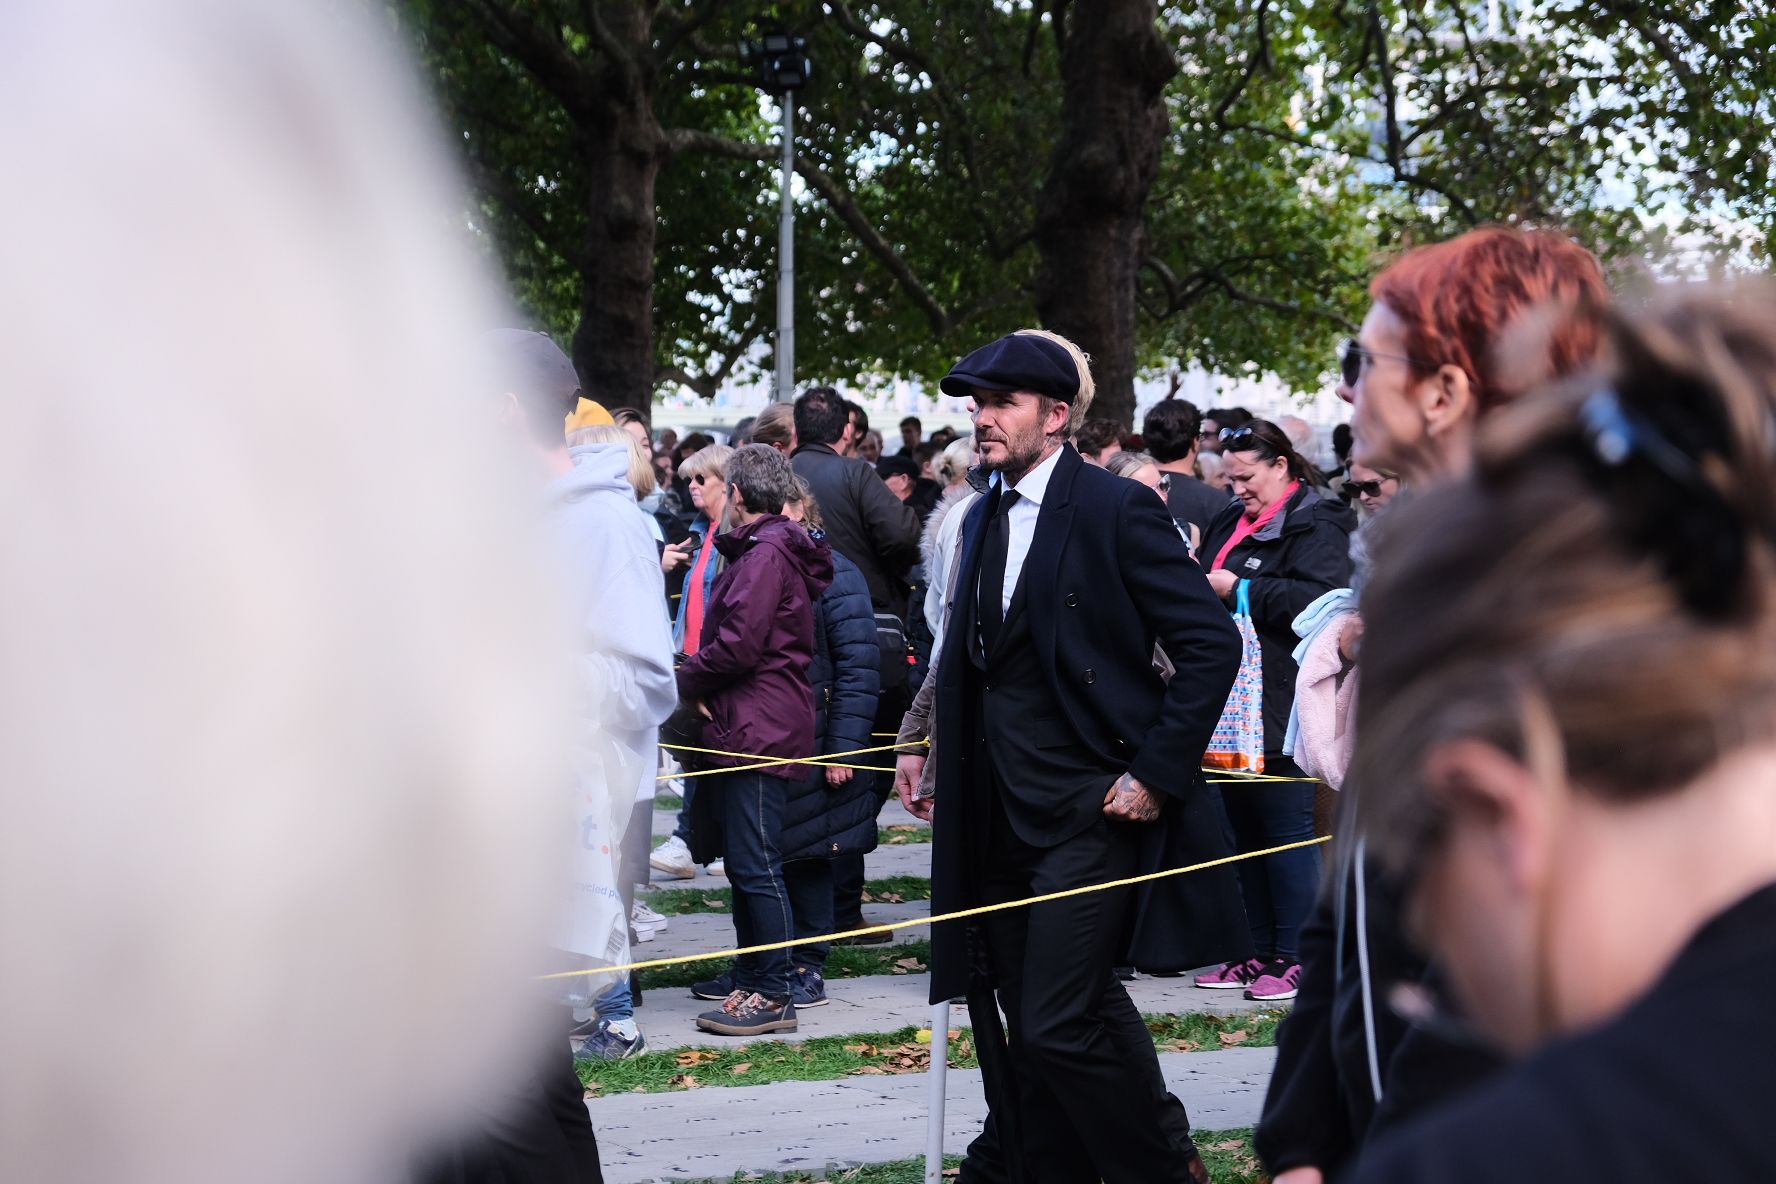 England football legend David Beckham queued for 13 hours to pay his respects to the Queen